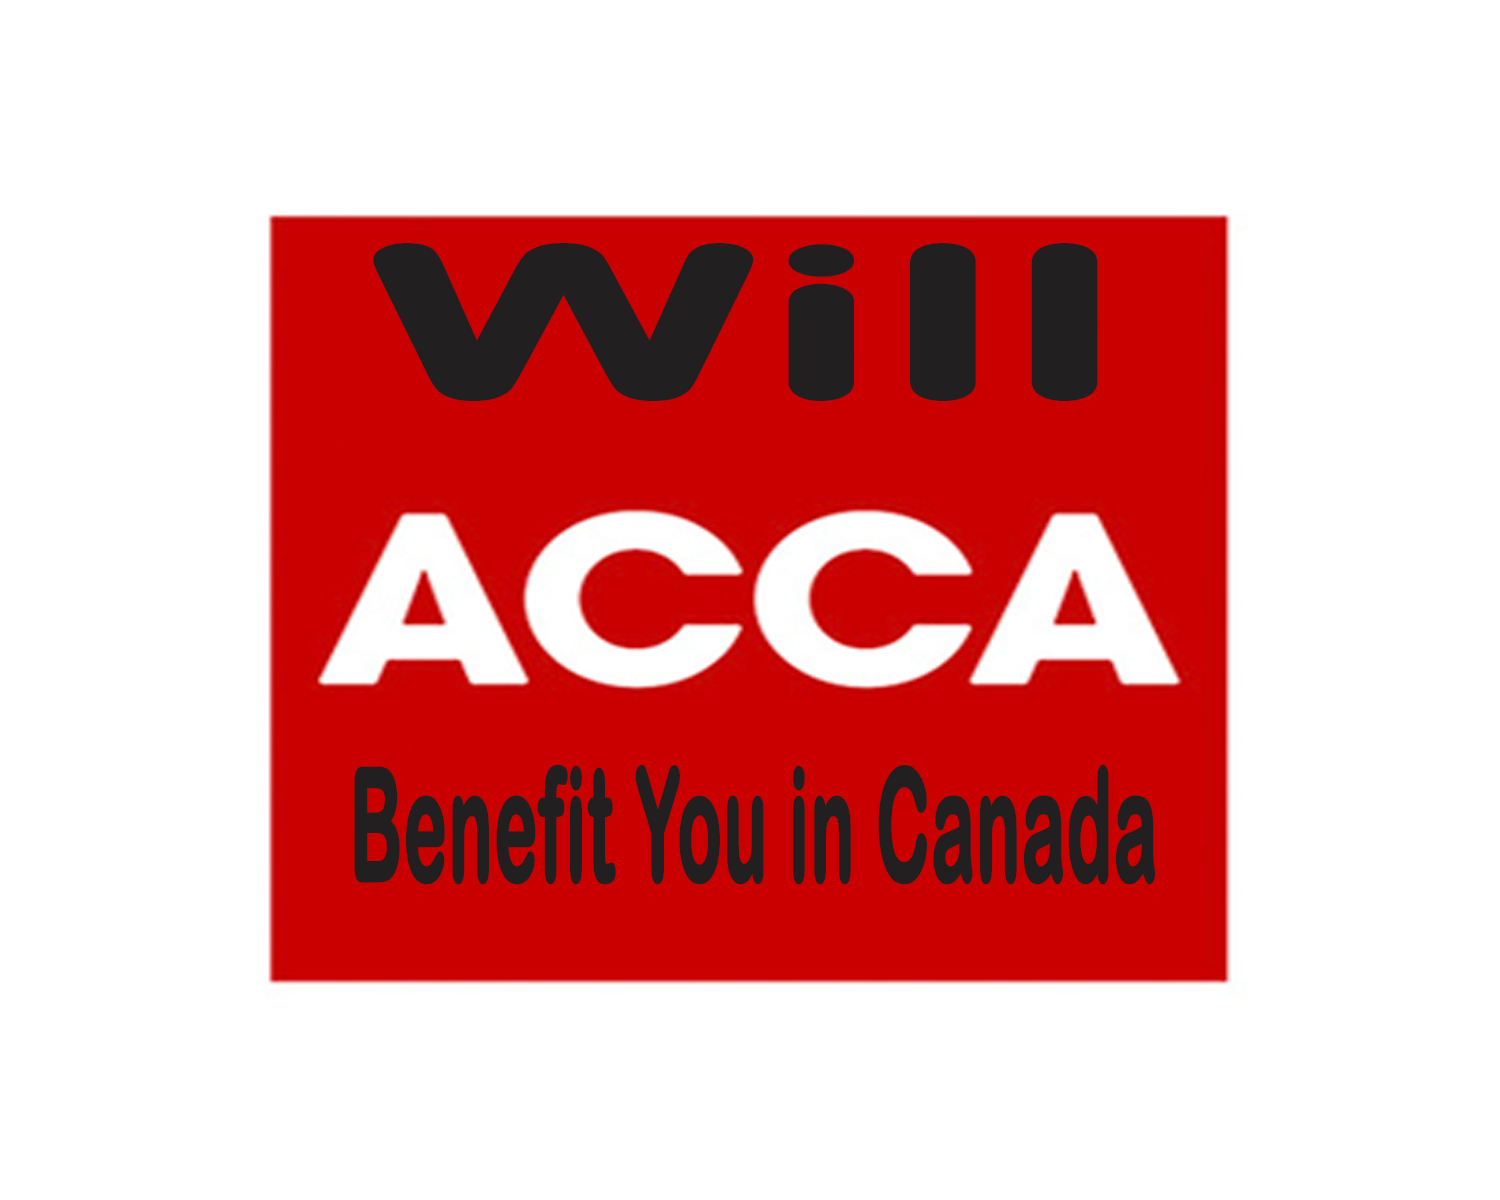 Acca certification